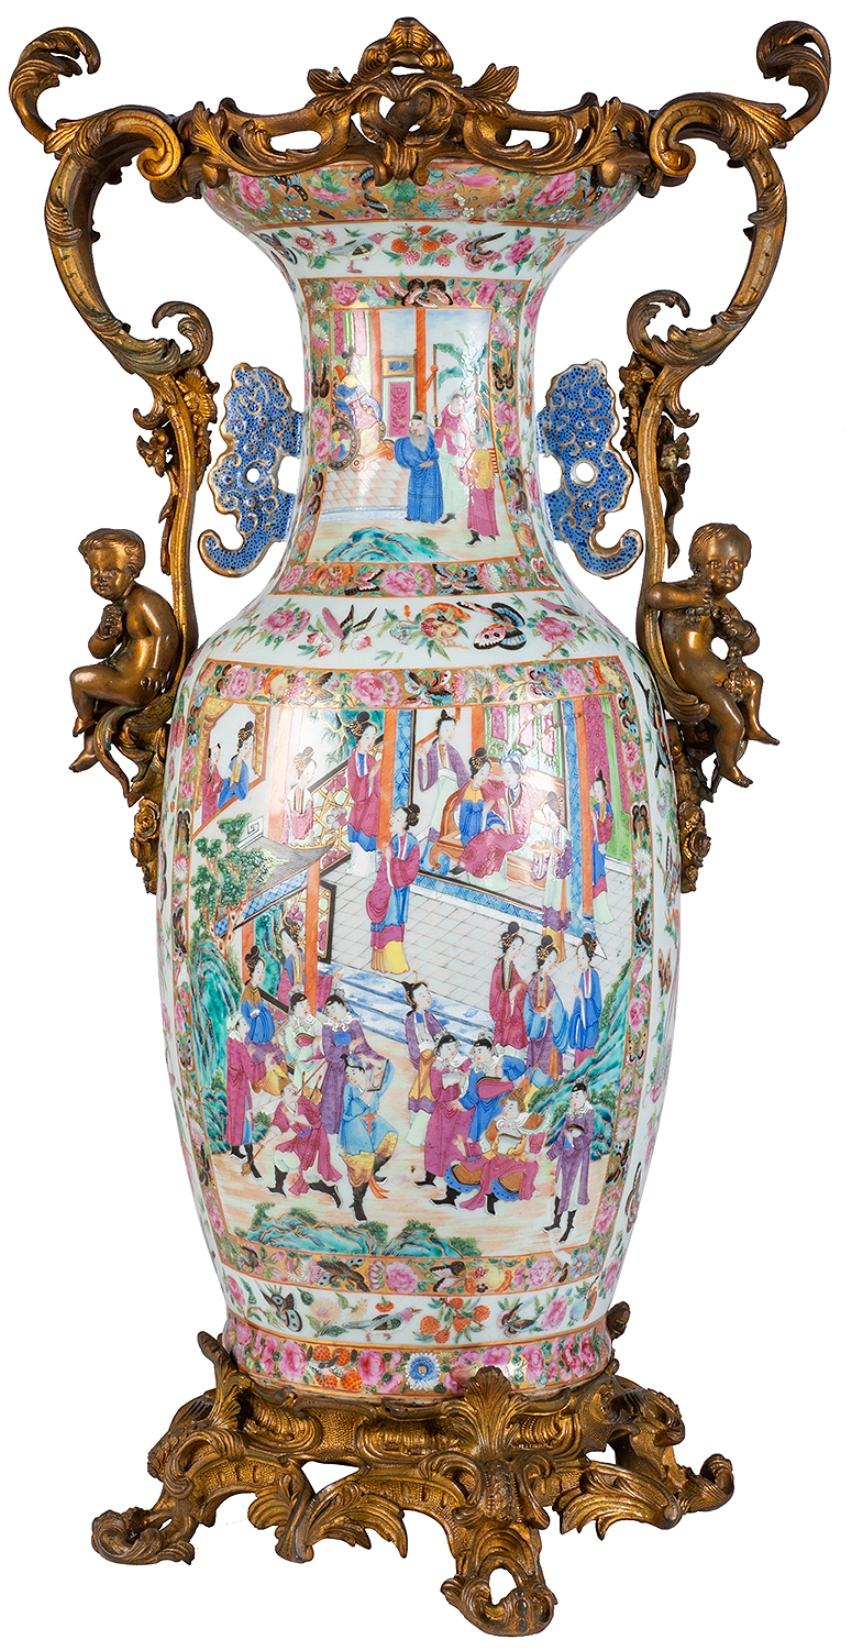 A very impressive 19th century Chinese rose medallion / canton vase / lamp, having wonderful gilded ormolu scrolling foliate Rococo style mounts with putti seated on either side. The vase having beautifully hand painted inset panels depicting